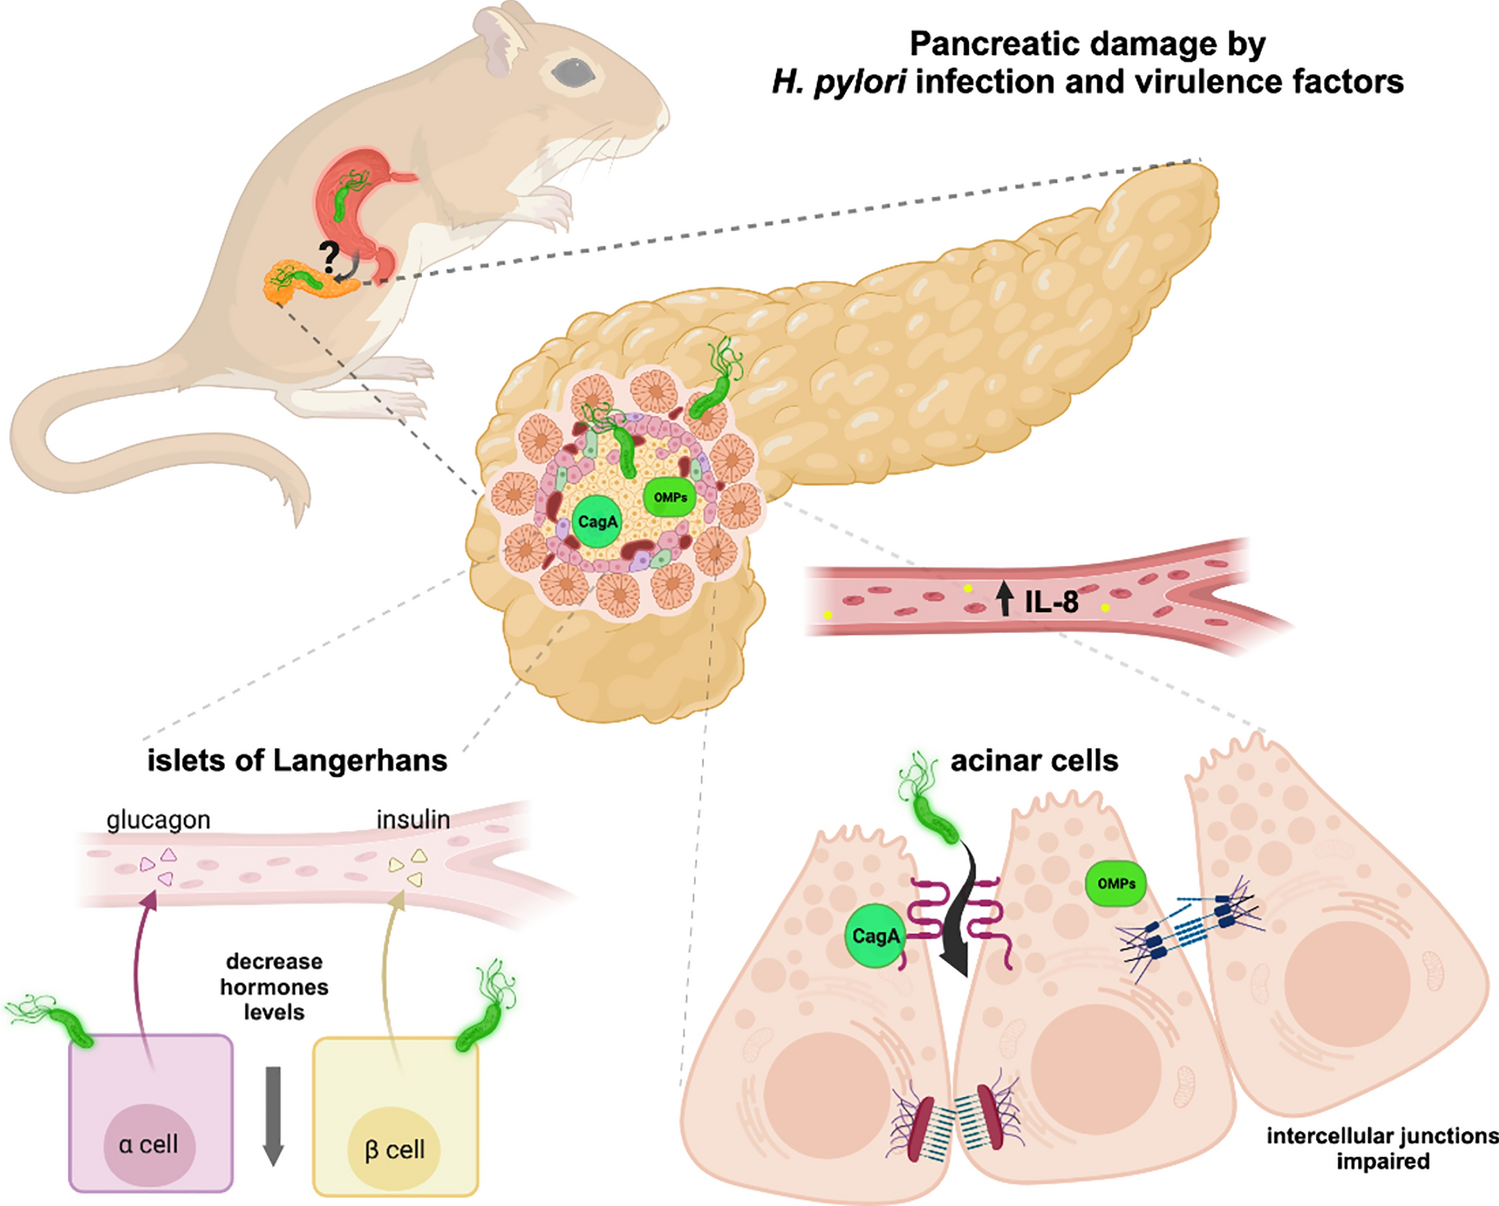 The Helicobacter pylori infection alters the intercellular junctions on the pancreas of gerbils (Meriones unguiculatus)